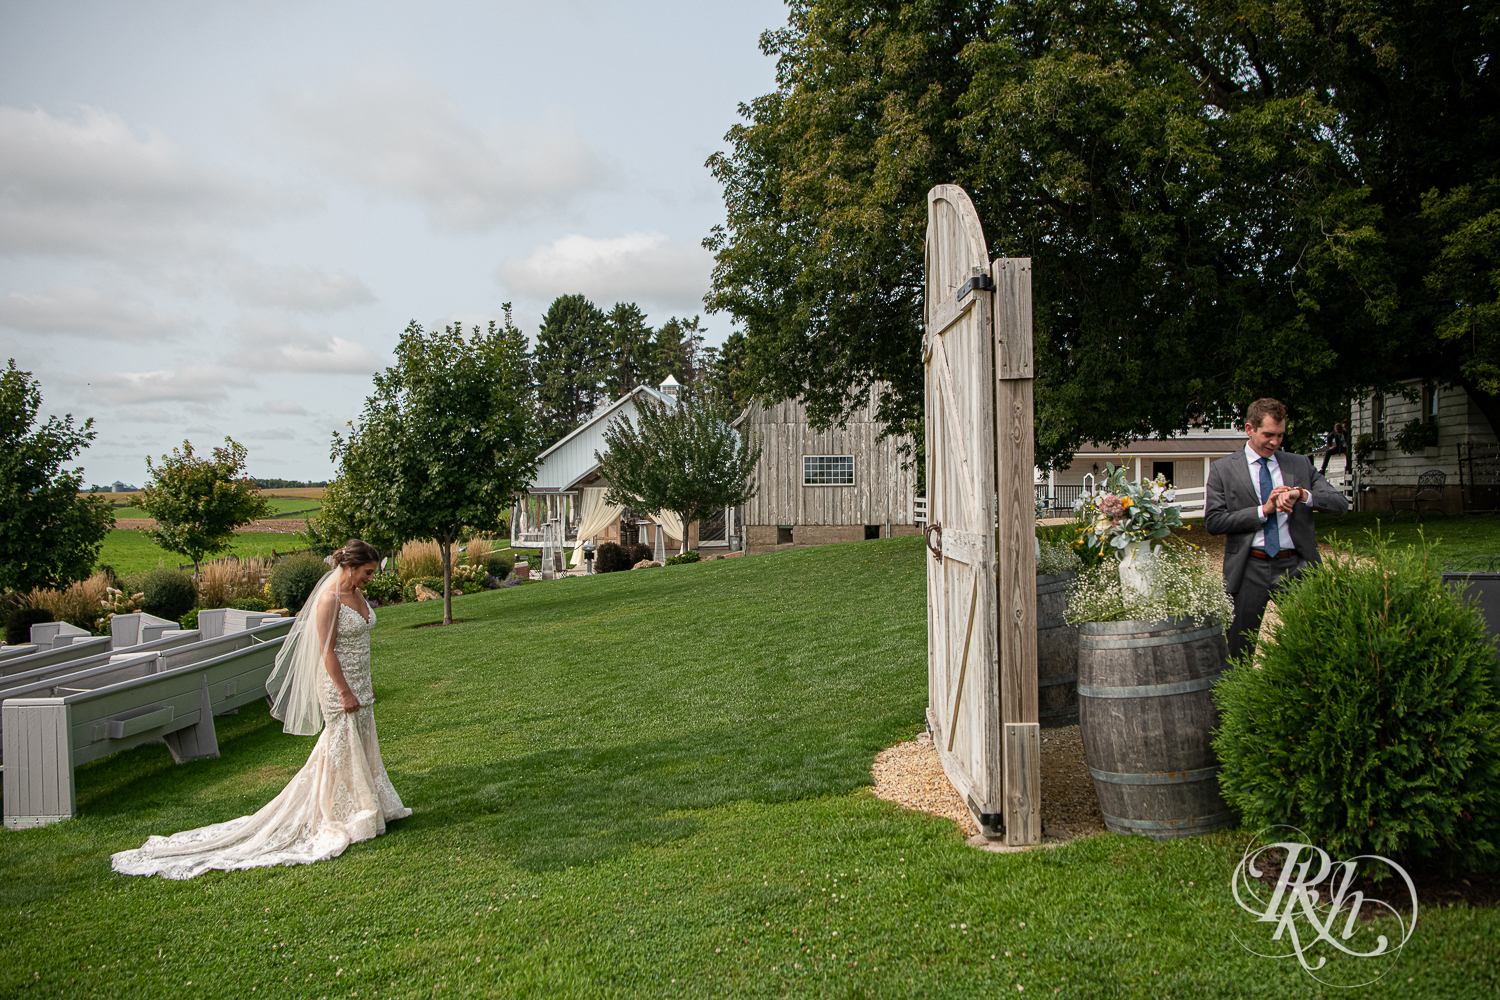 Bride and groom share first look at Legacy Hills Farm in Welch, Minnesota.